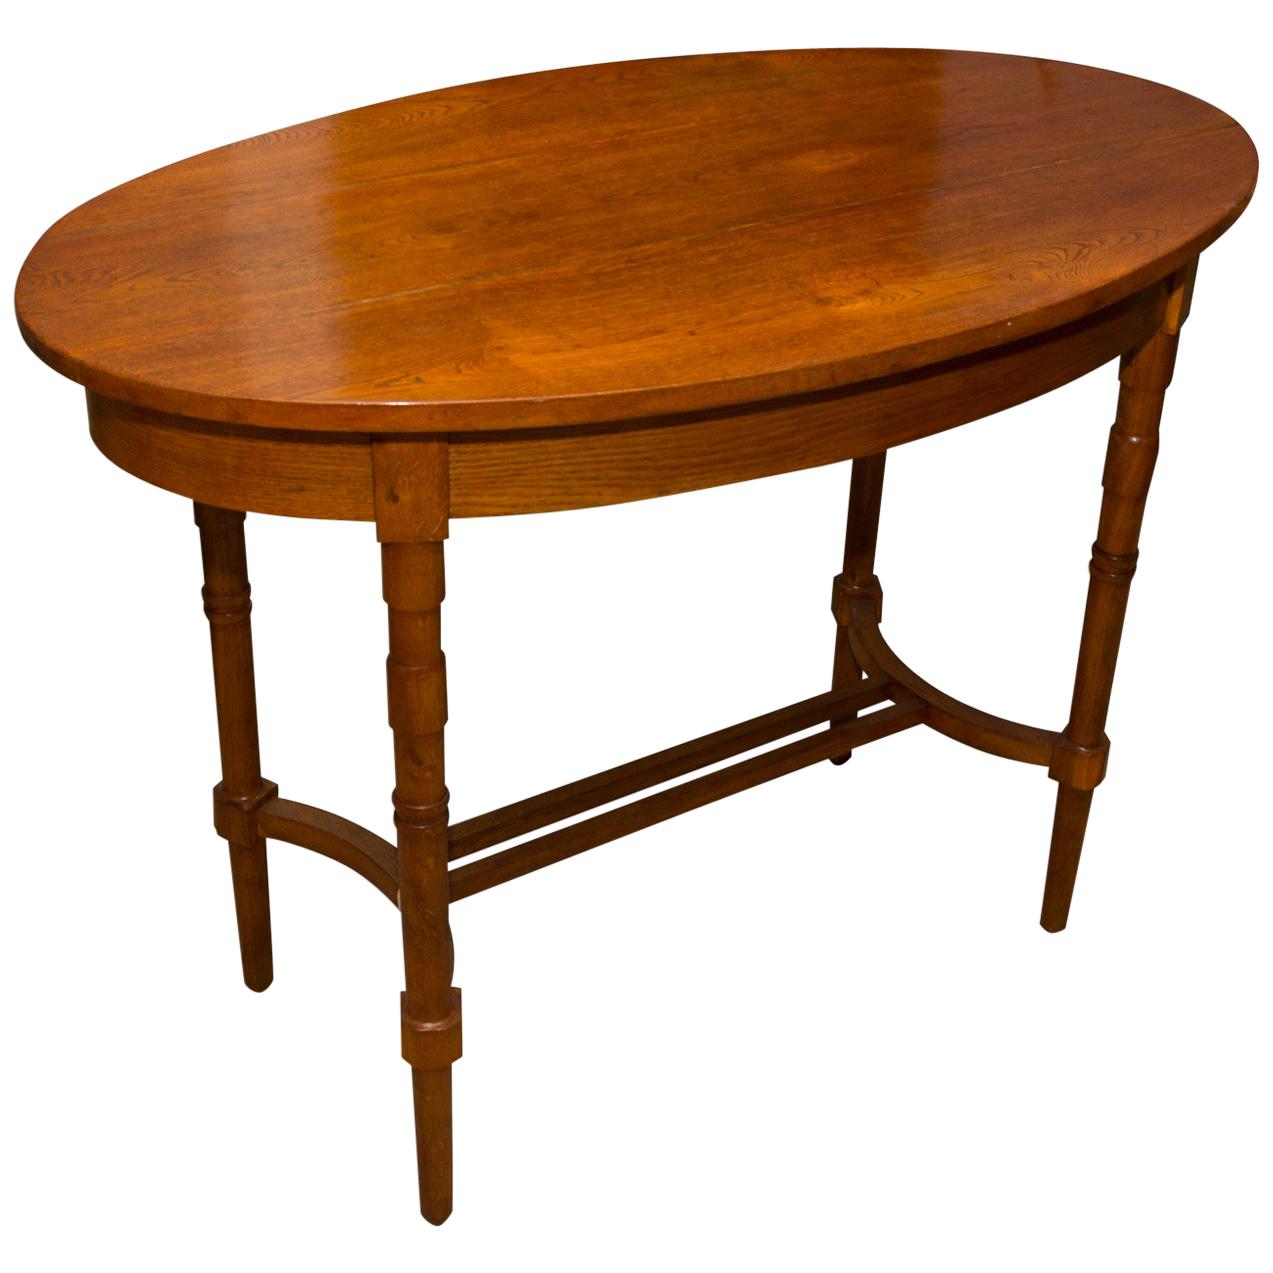 Early 20th Century Secessionist Oak Occasional Table, Austria-Hungary